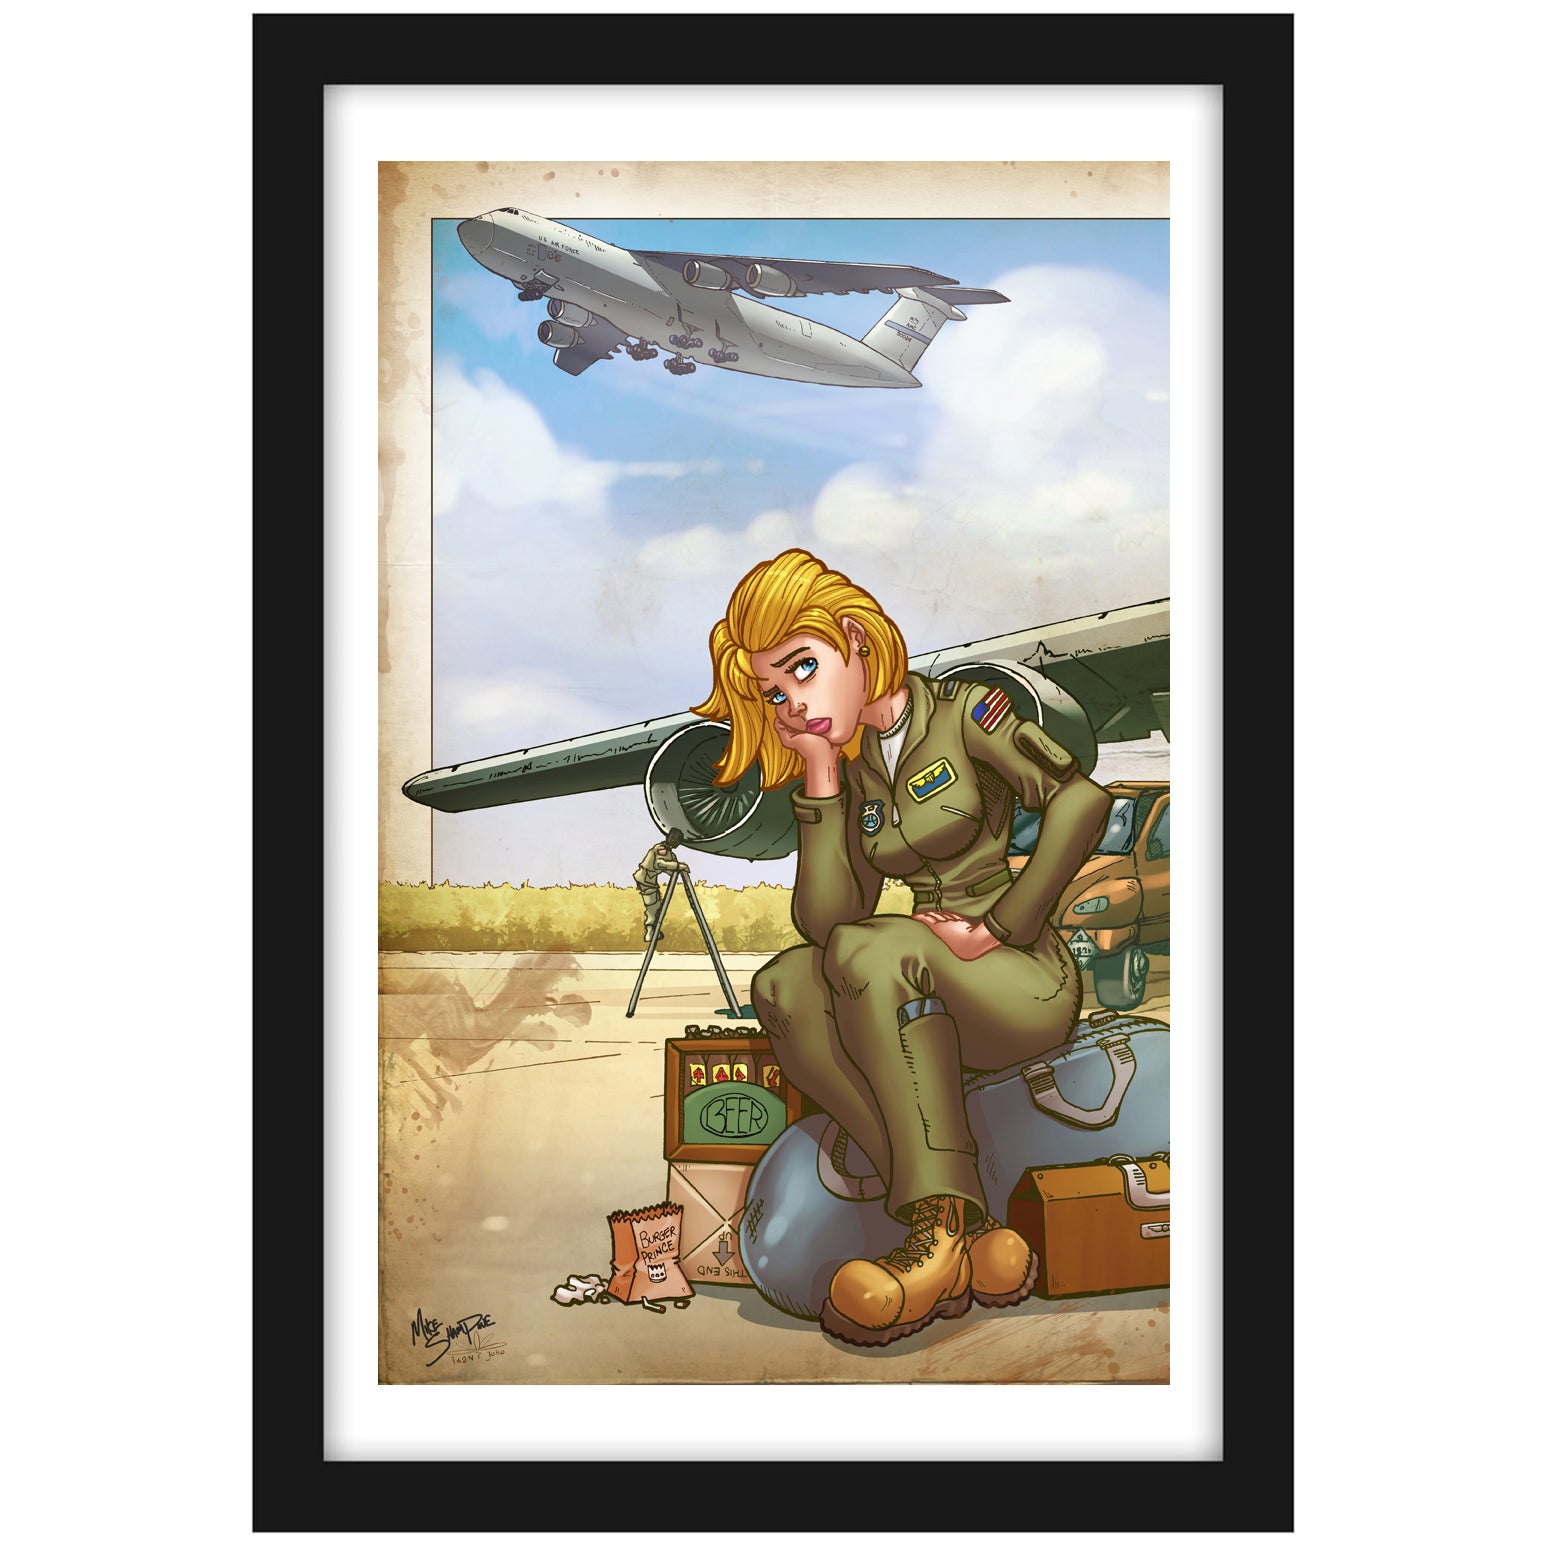 C-5 Galaxy "1 Hour ETIC" - Vintage Print Pinup & Airplane Art by Mike Shampine - Signed and Numbered (1 of 3 print series)